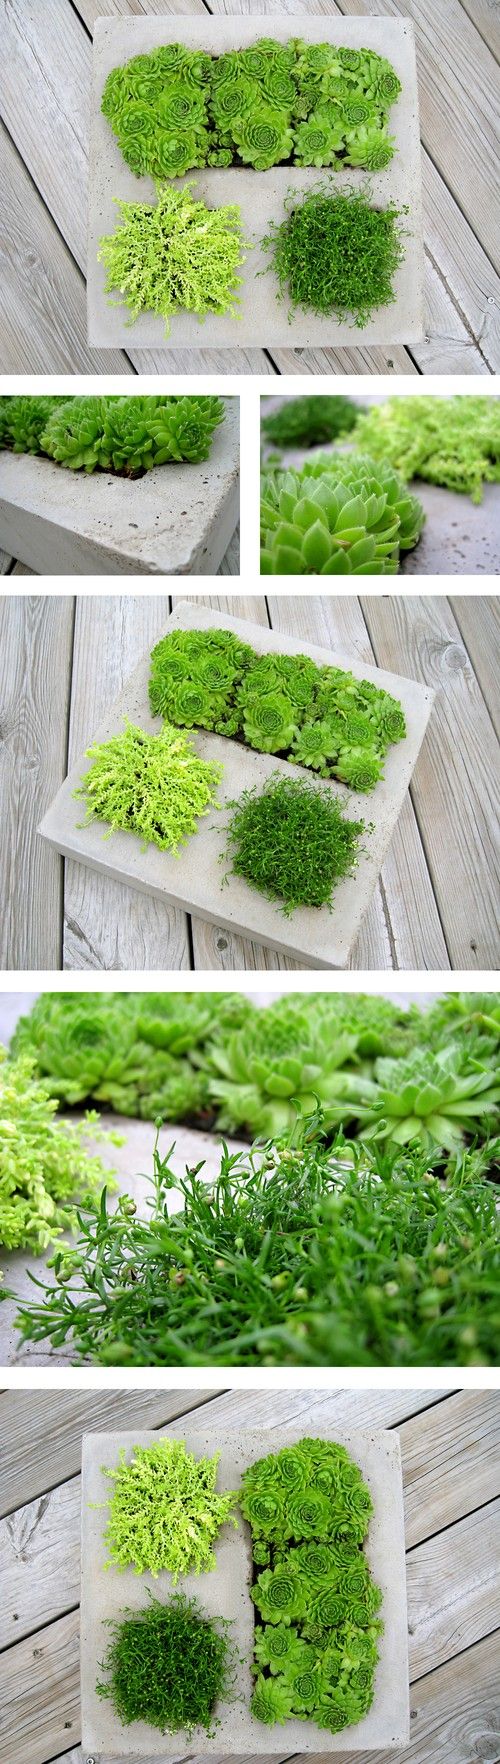 diy-modern-and-concrete-planters-10